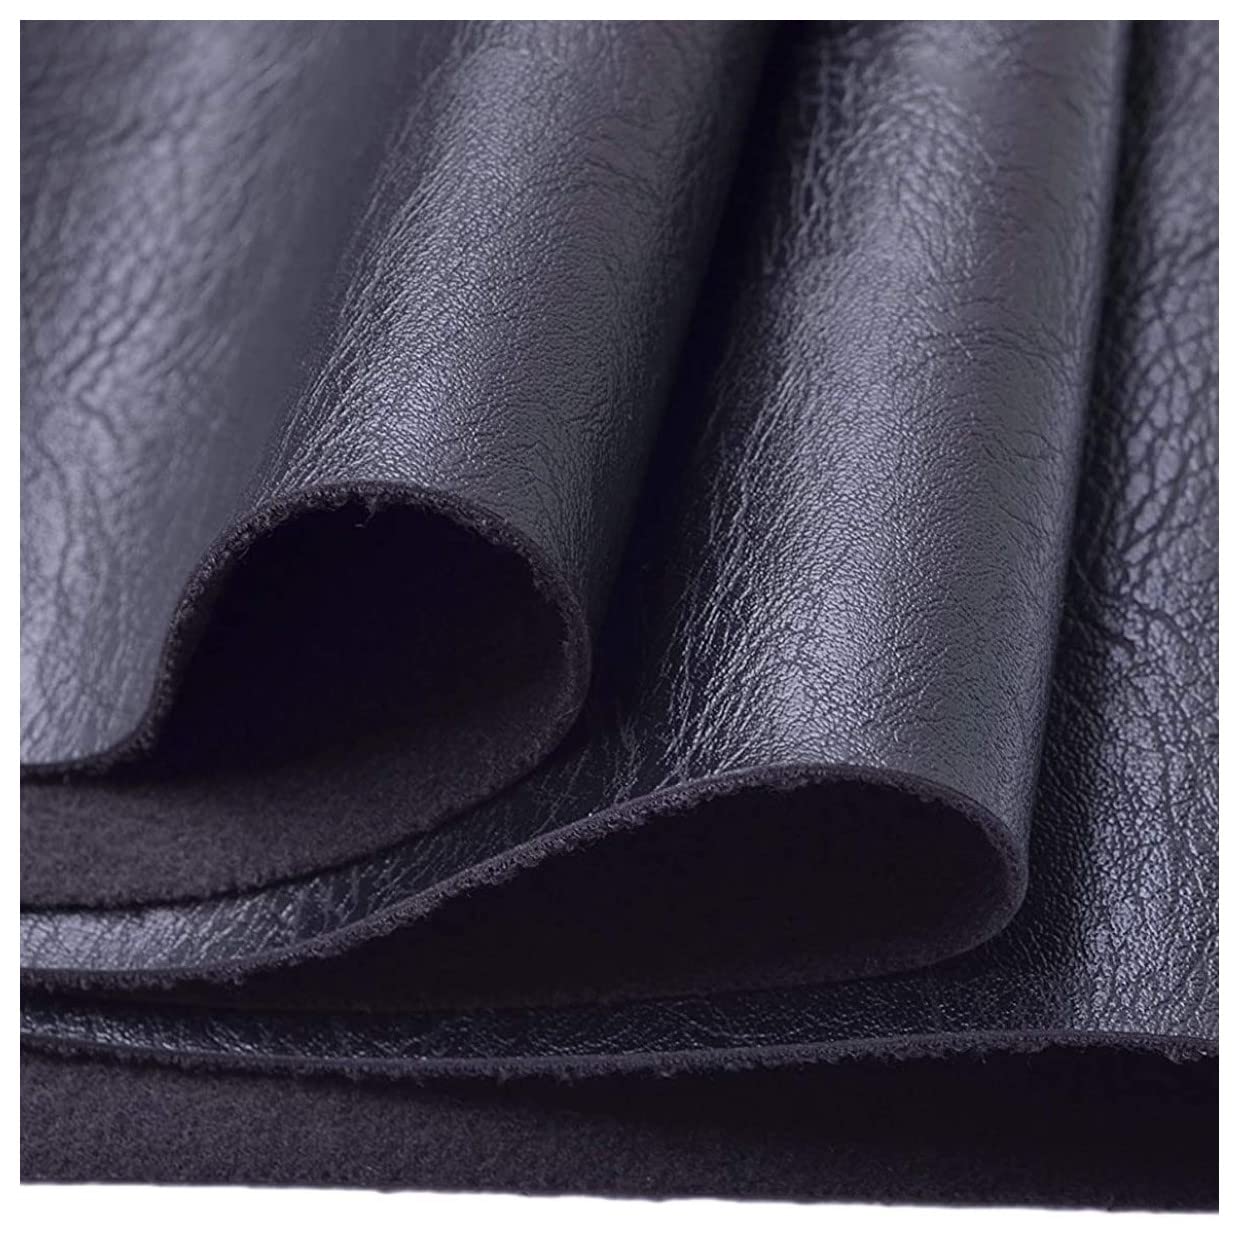 Bowzar Rolex Rexine Faux Artificial Leatherette for Sofa Upholstery Home Furnishing